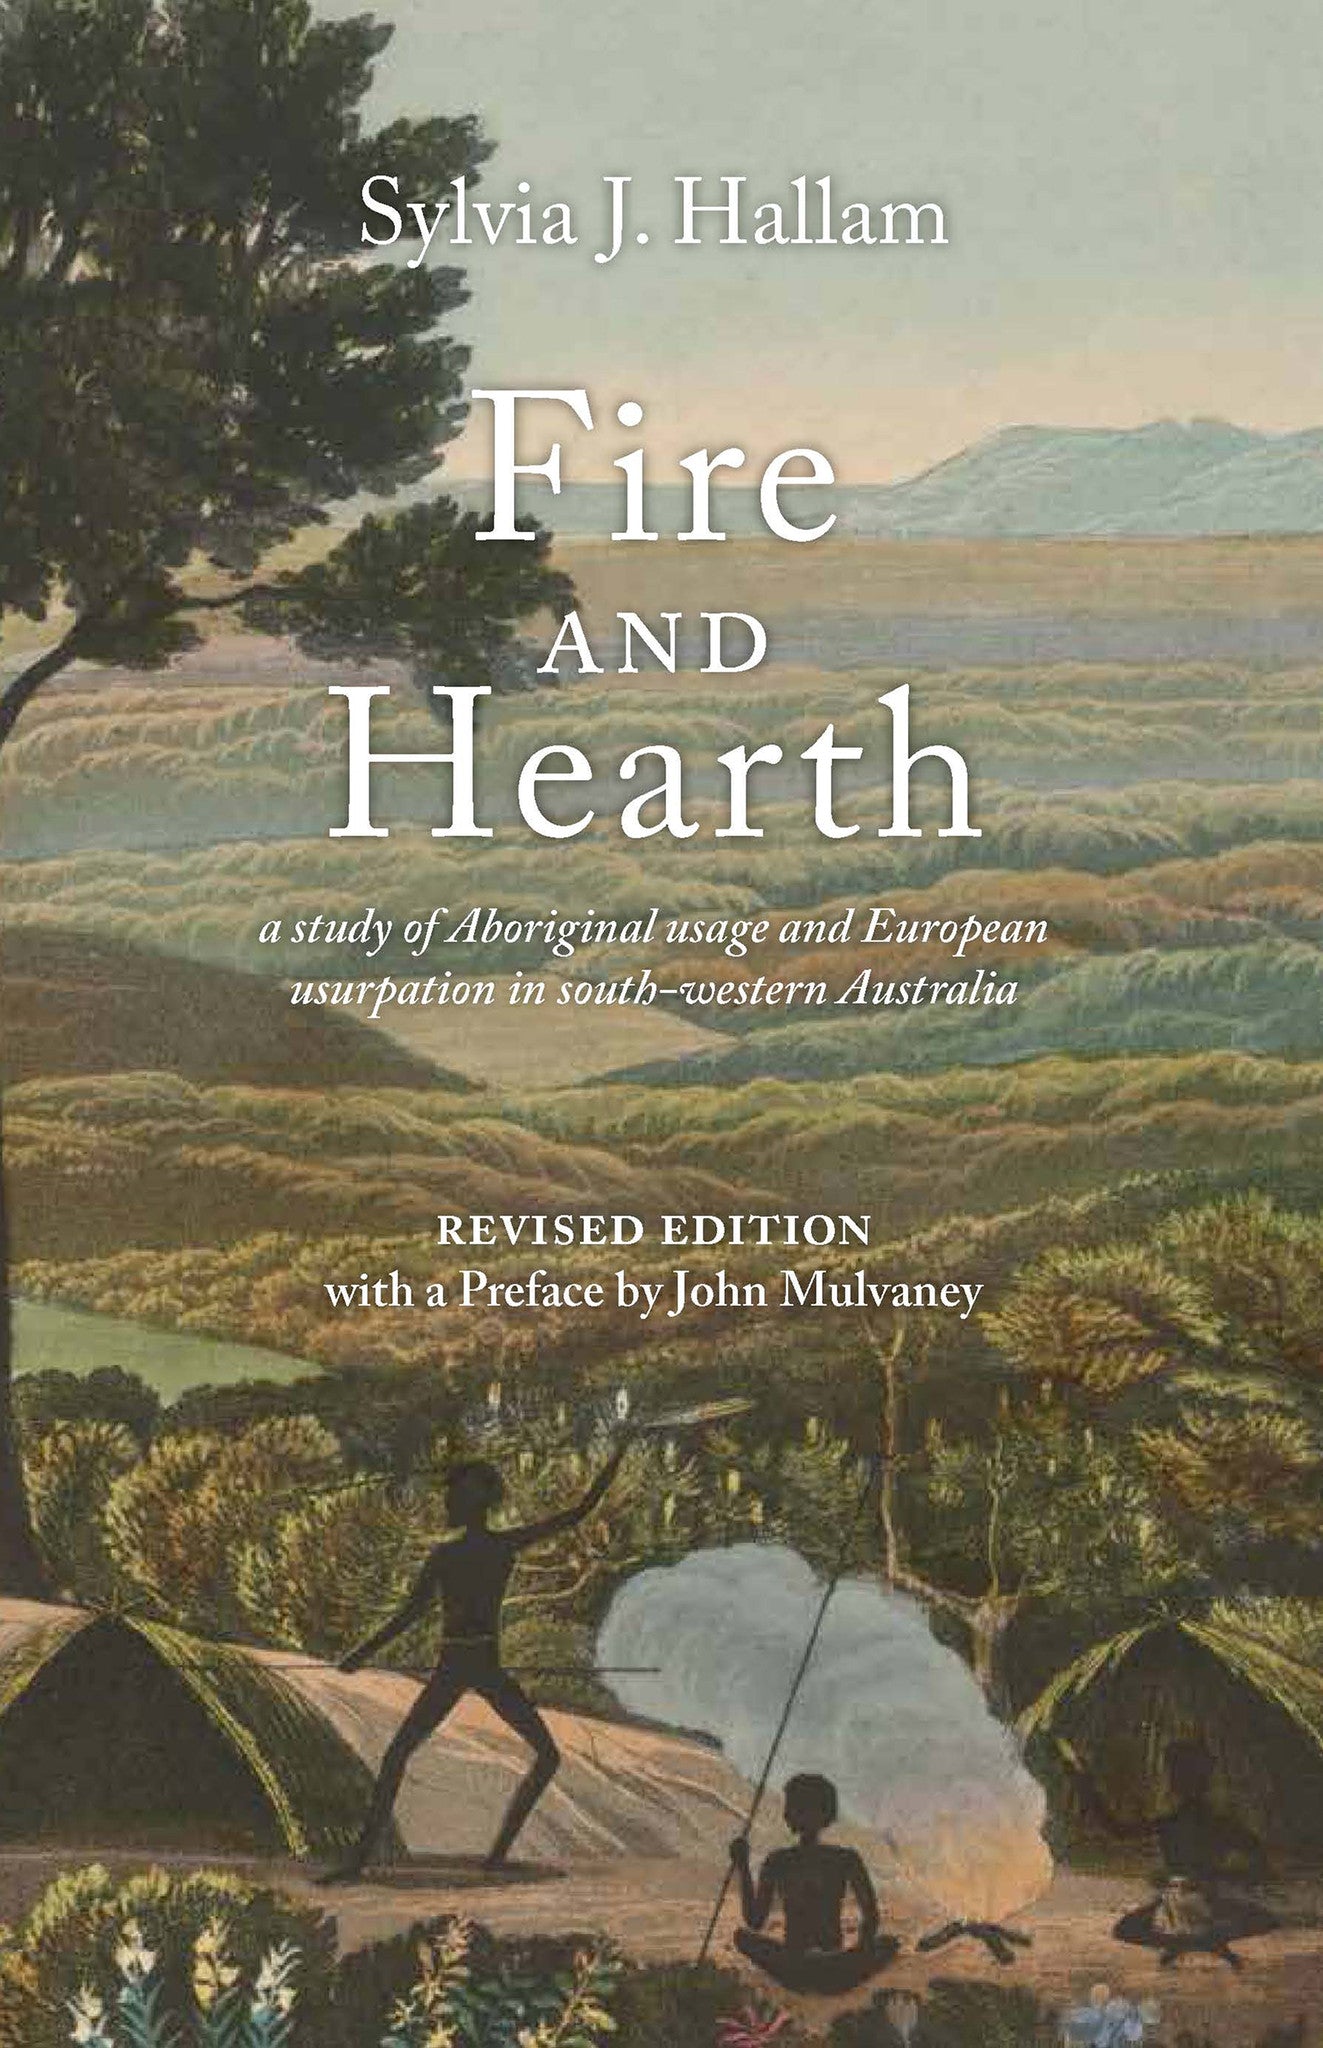 Fire and Hearth: A study of Aboriginal usage and European usurpation in south-western Australia